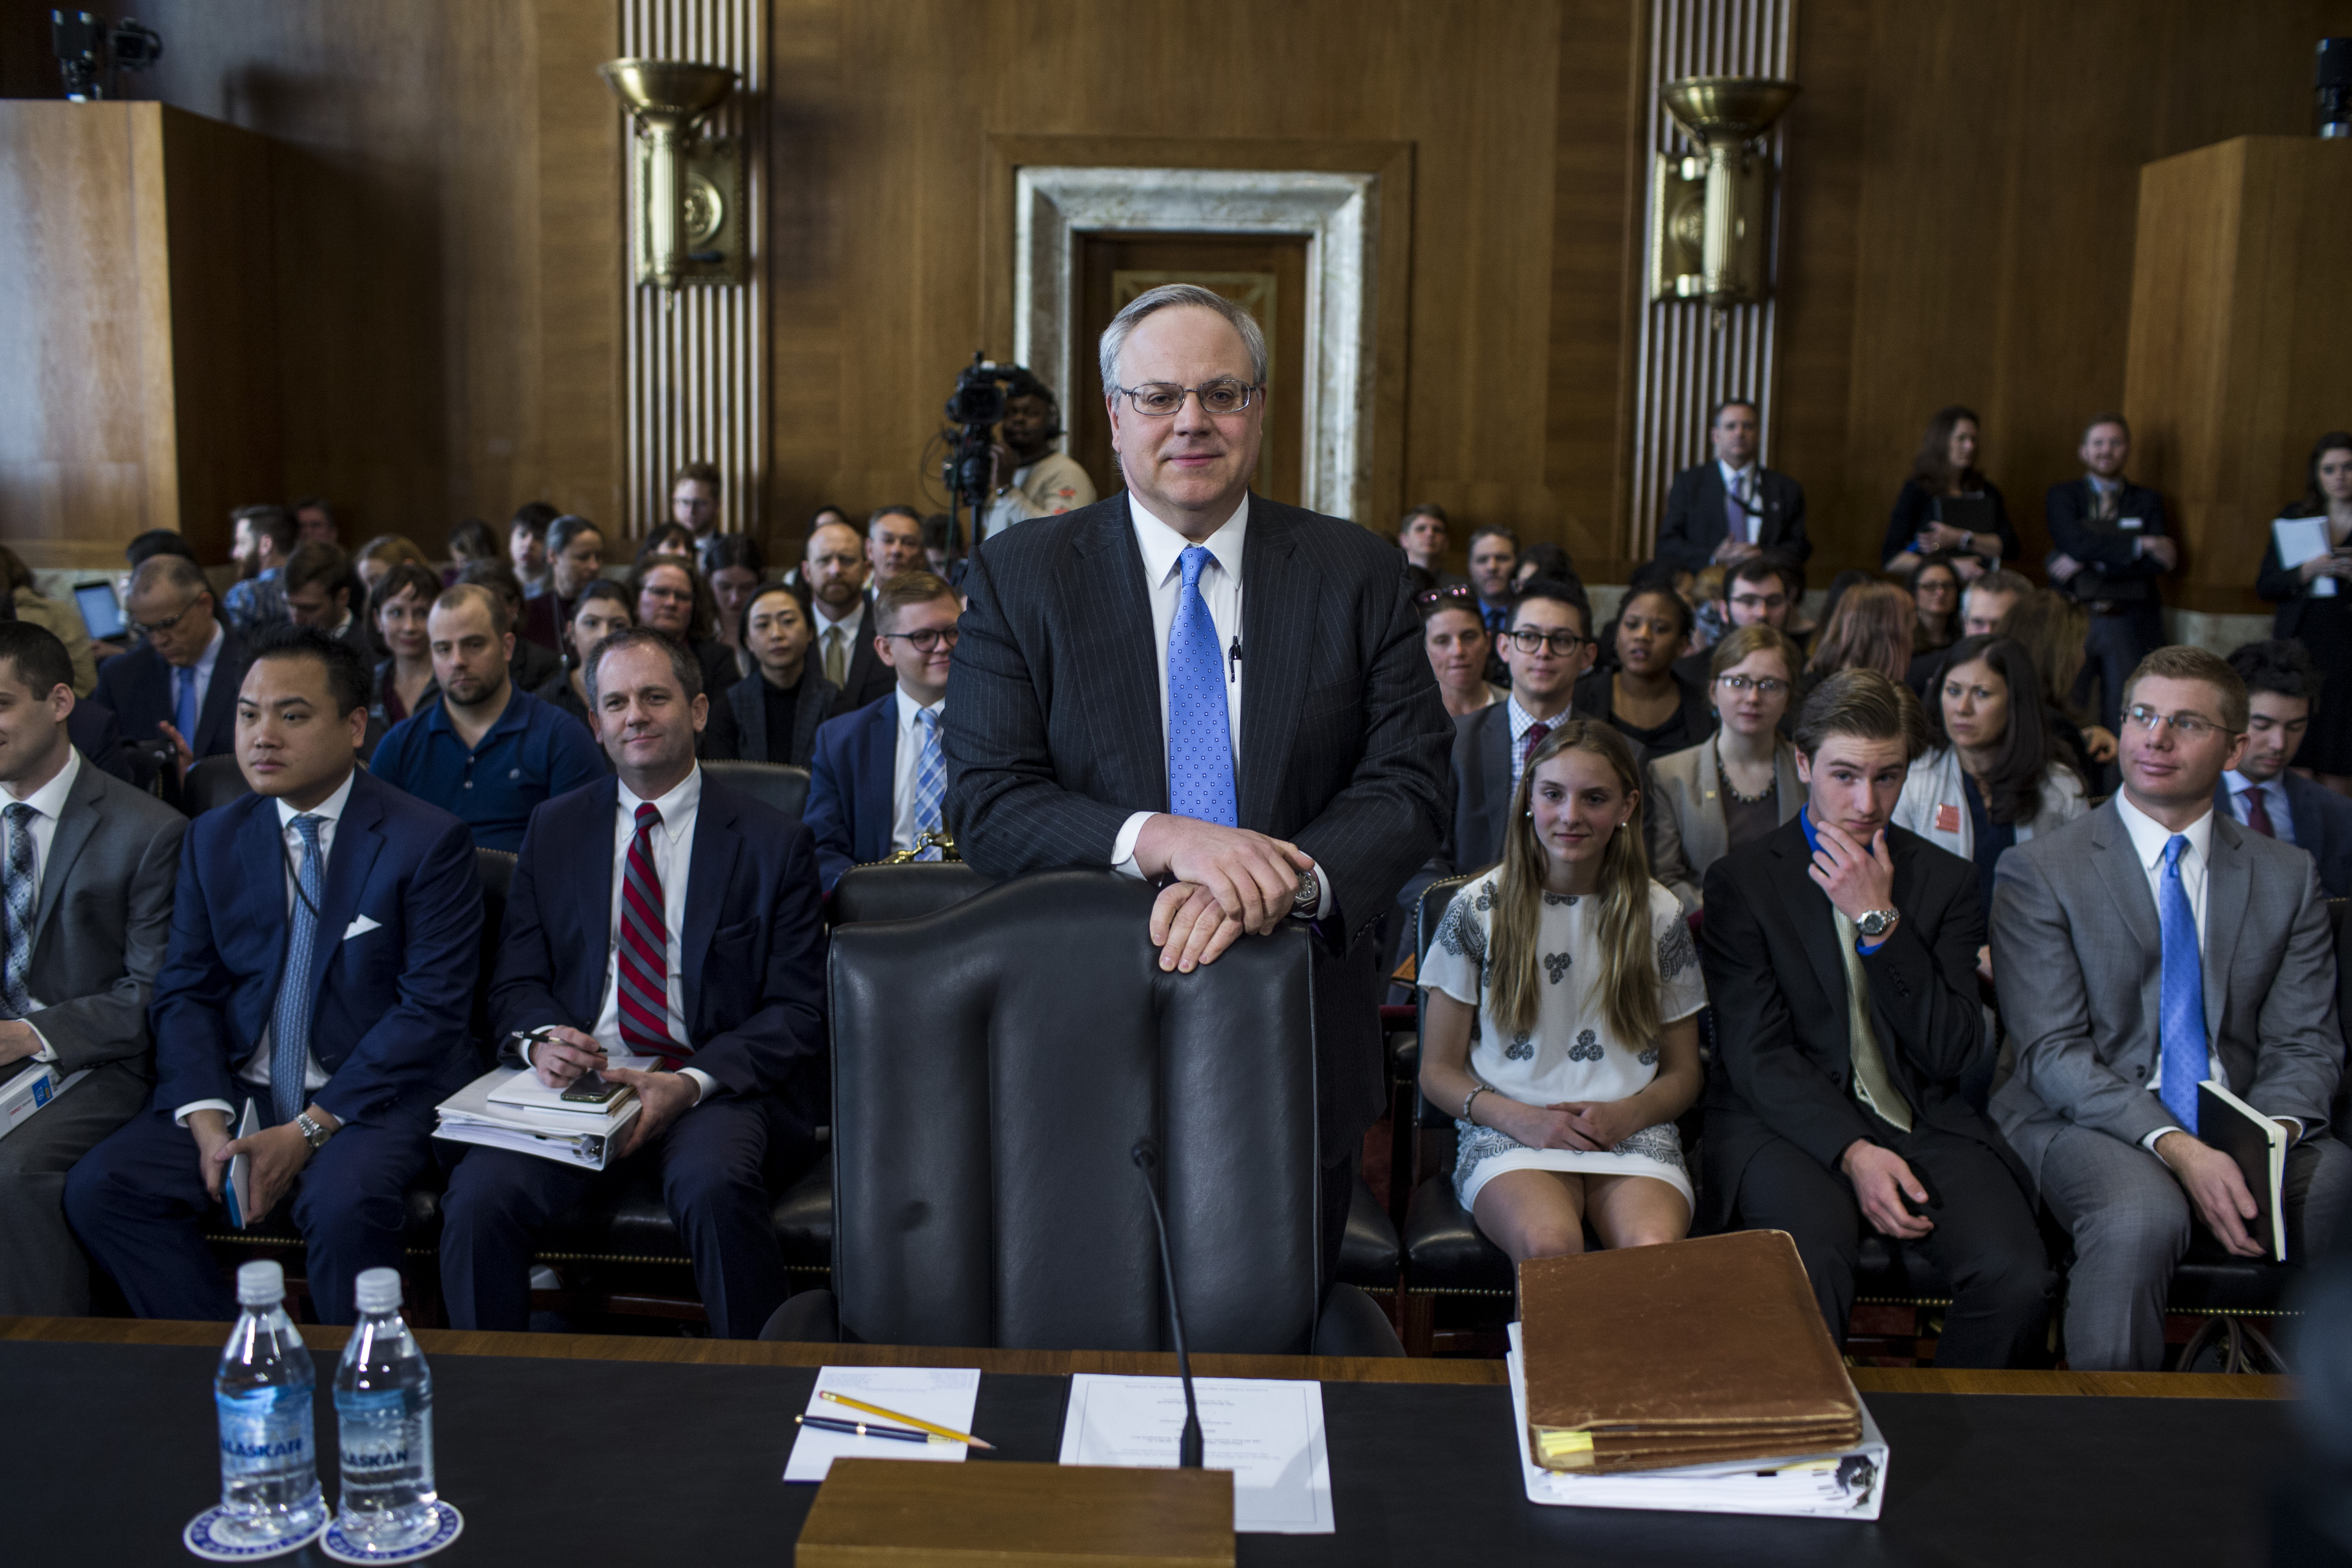 David Bernhardt, President Donald Trump's nominee to be Interior Secretary, arrives before testifying during a Senate Energy and Natural Resources Committee confirmation hearing on March 28, 2019 in Washington, DC.